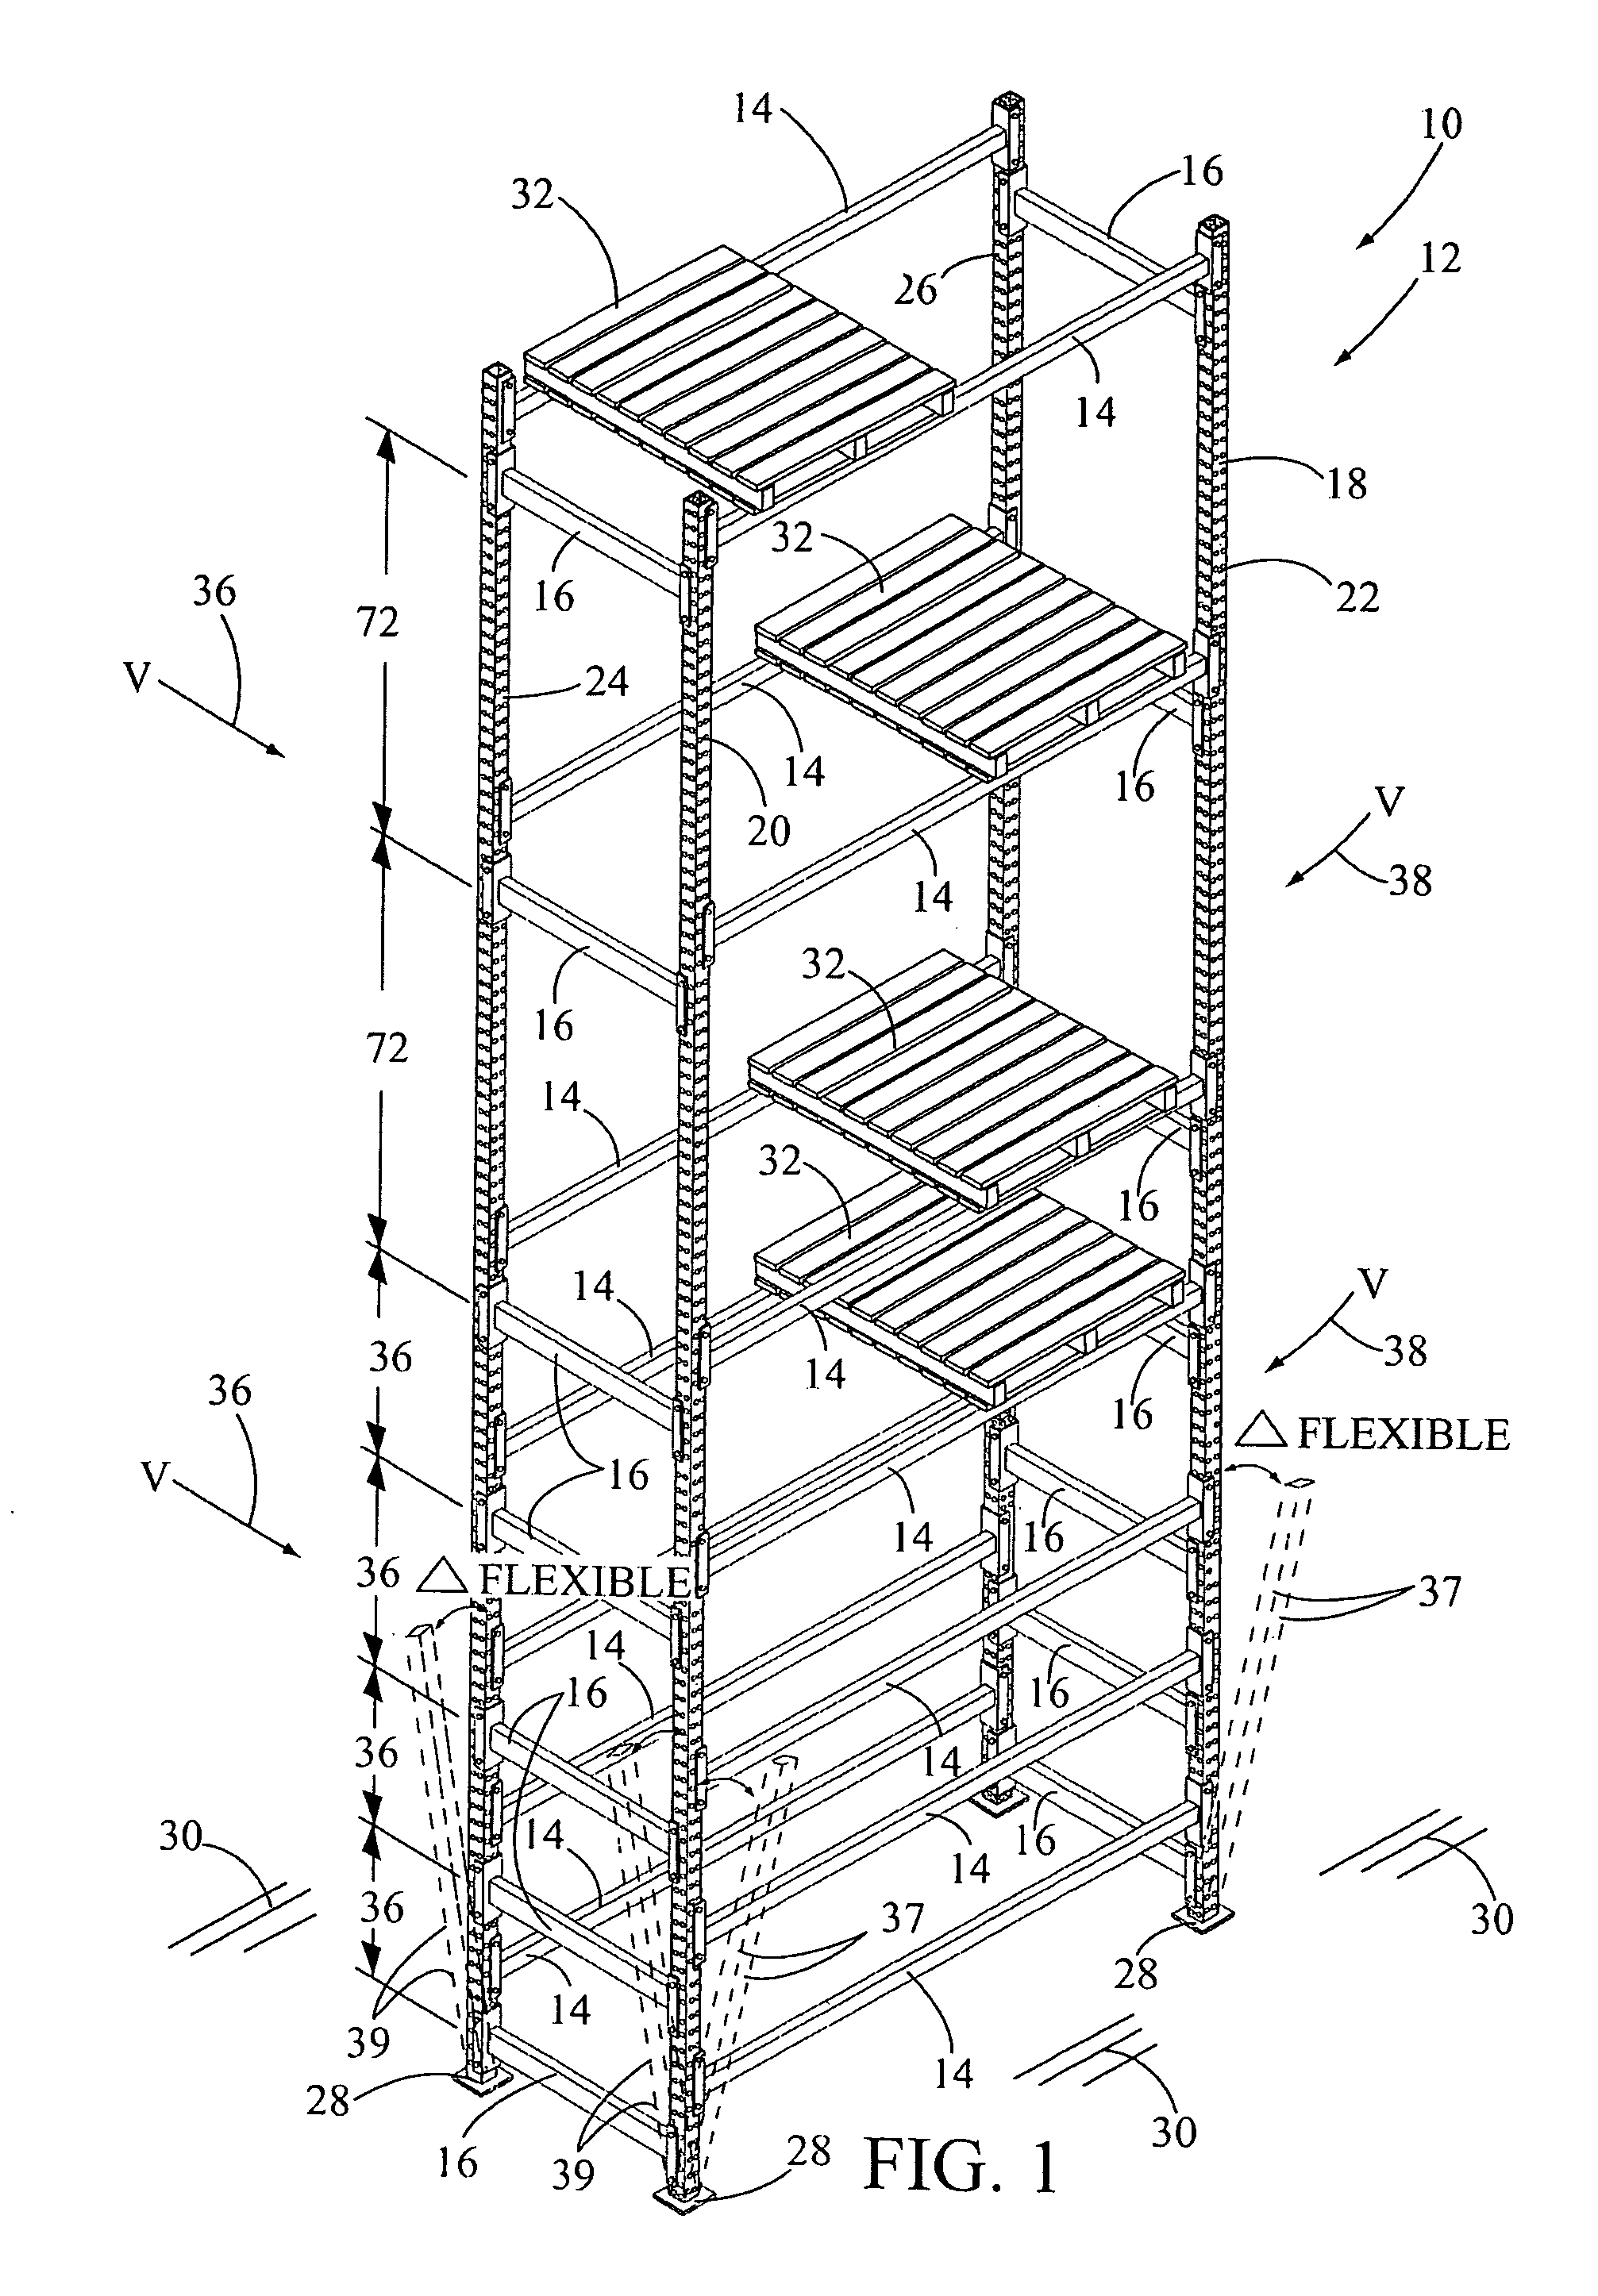 Storage rack, flexible moment frame for reducing seismic damage to stored goods